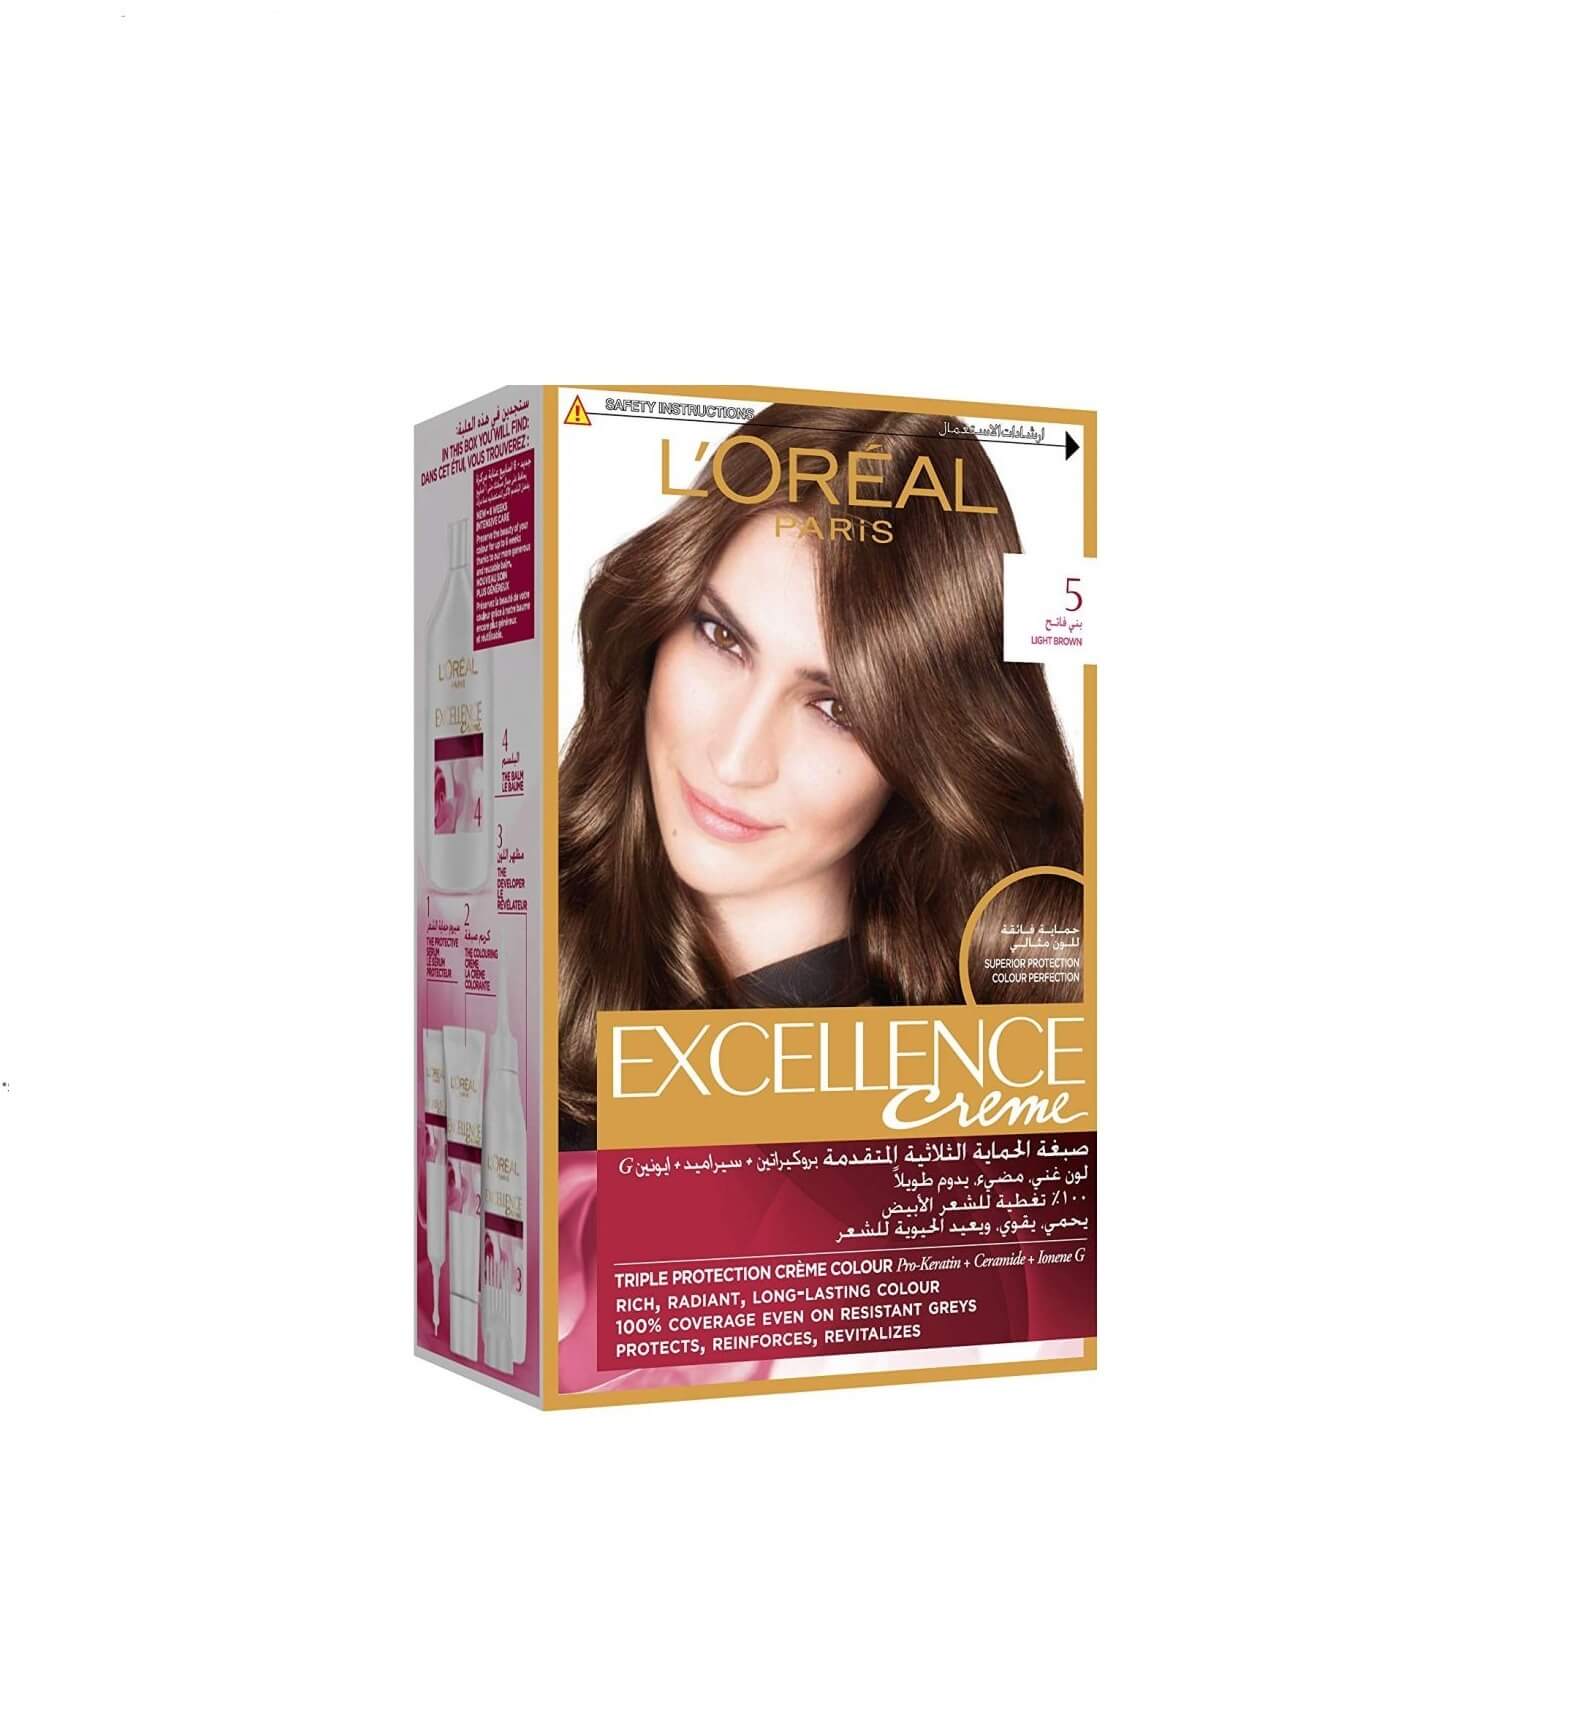 LOreal Excellence Creme - 5 Light Brown